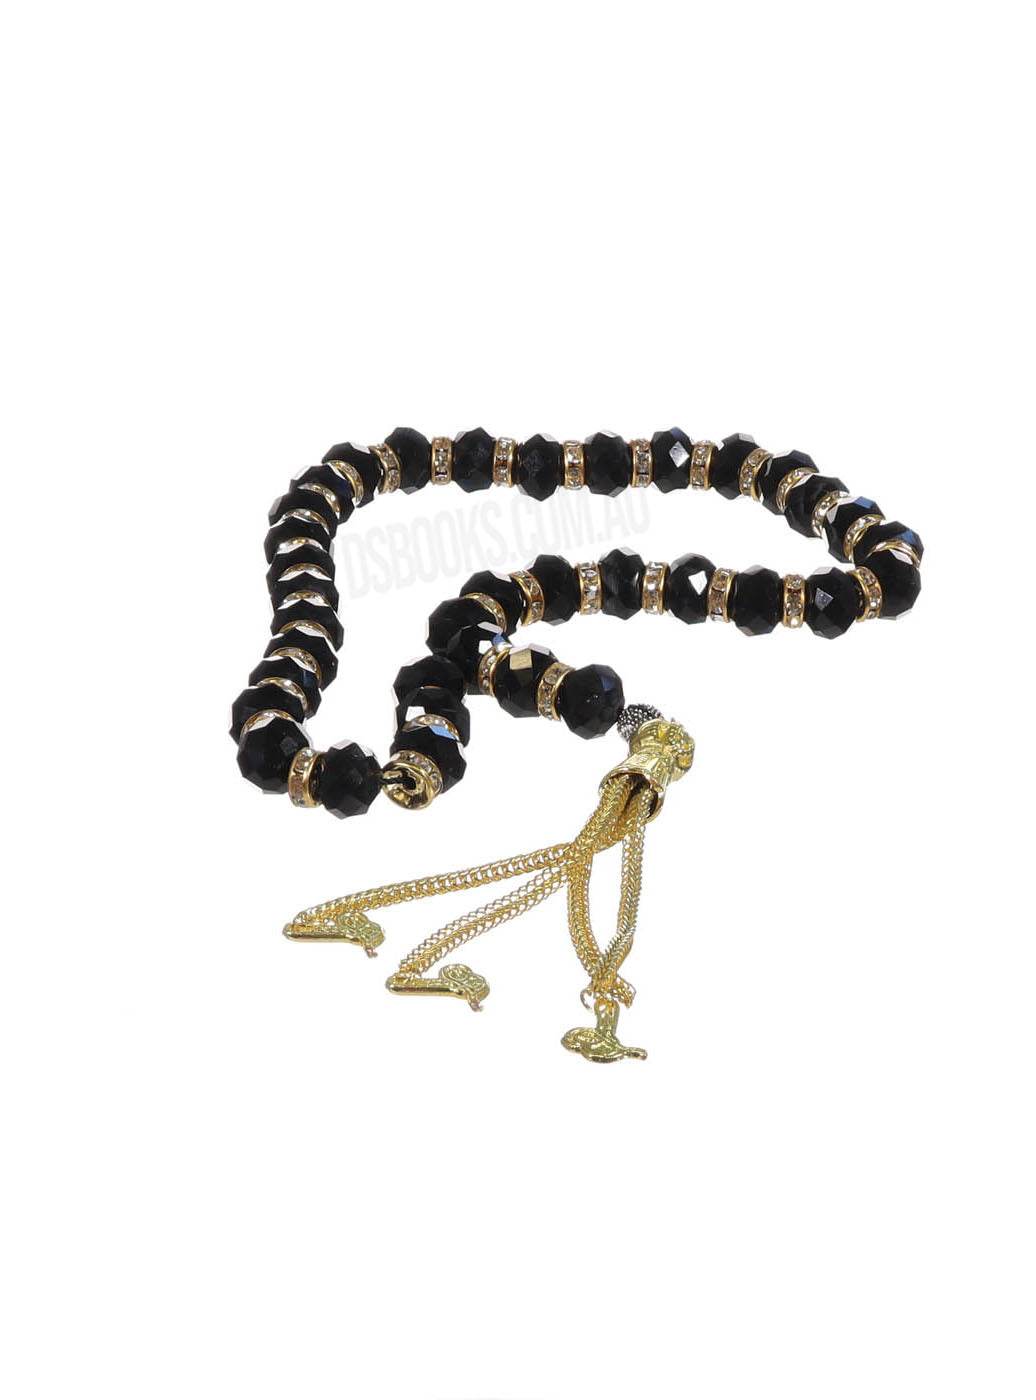 Deluxe Black and Crystal Gold Tasbih